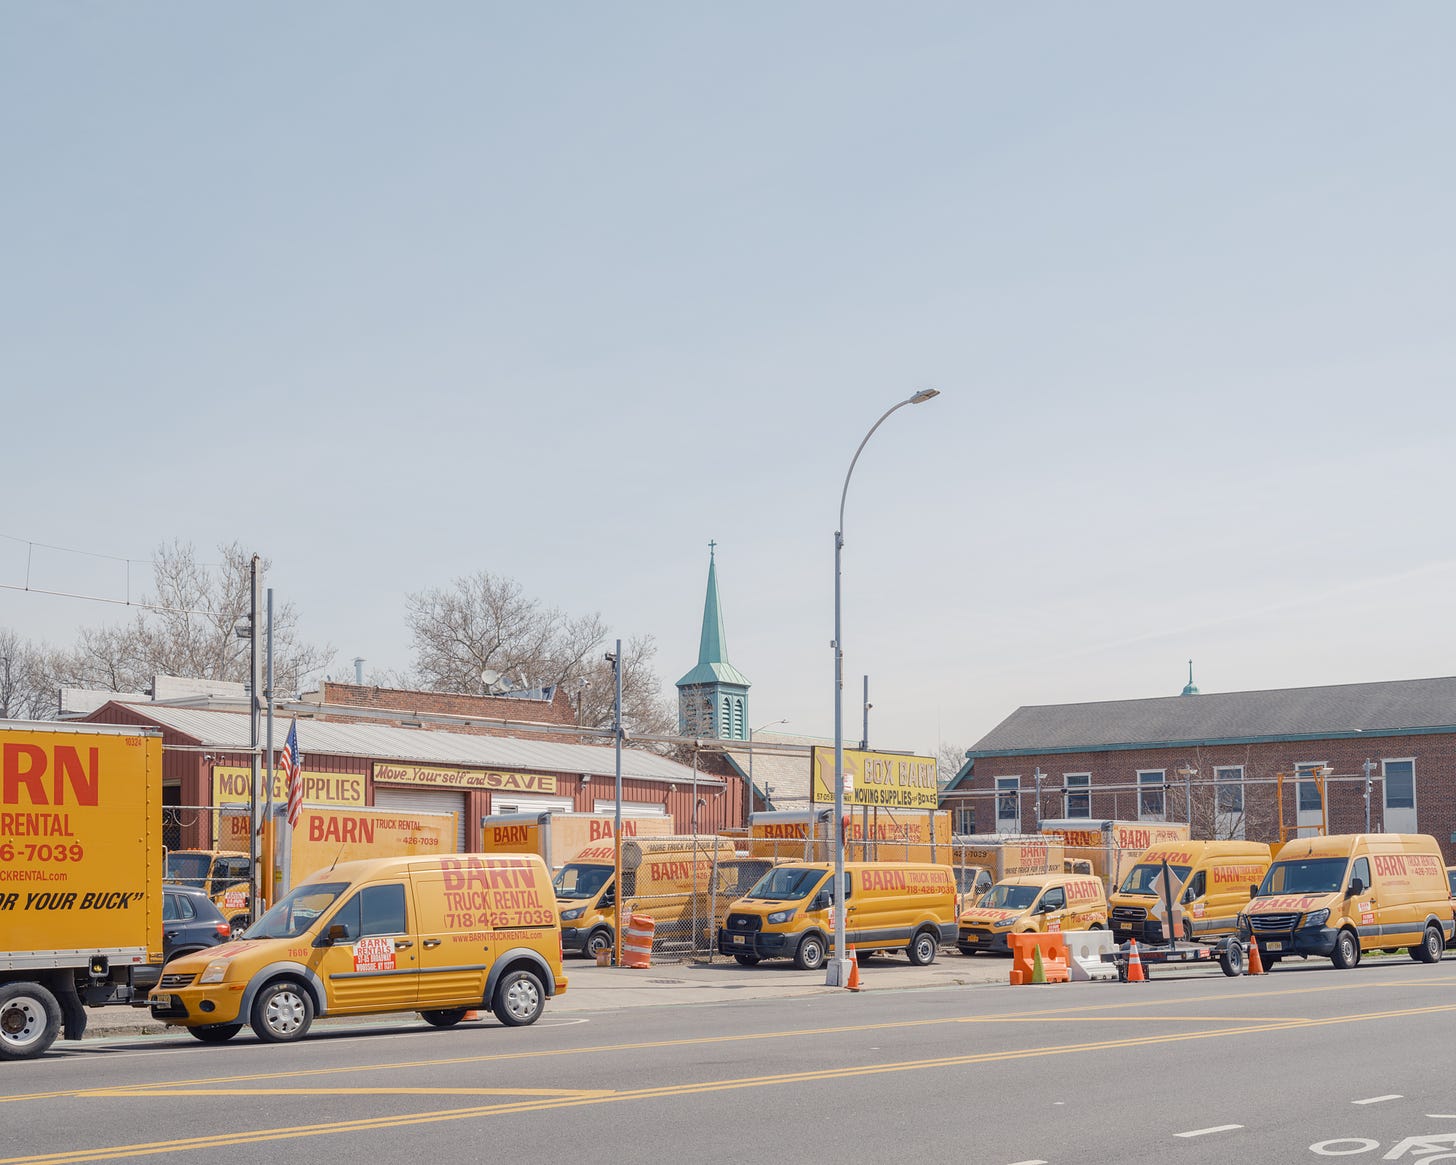 Fleet of yellow vans and trucks from Barn Truck rental with green church spire in the background